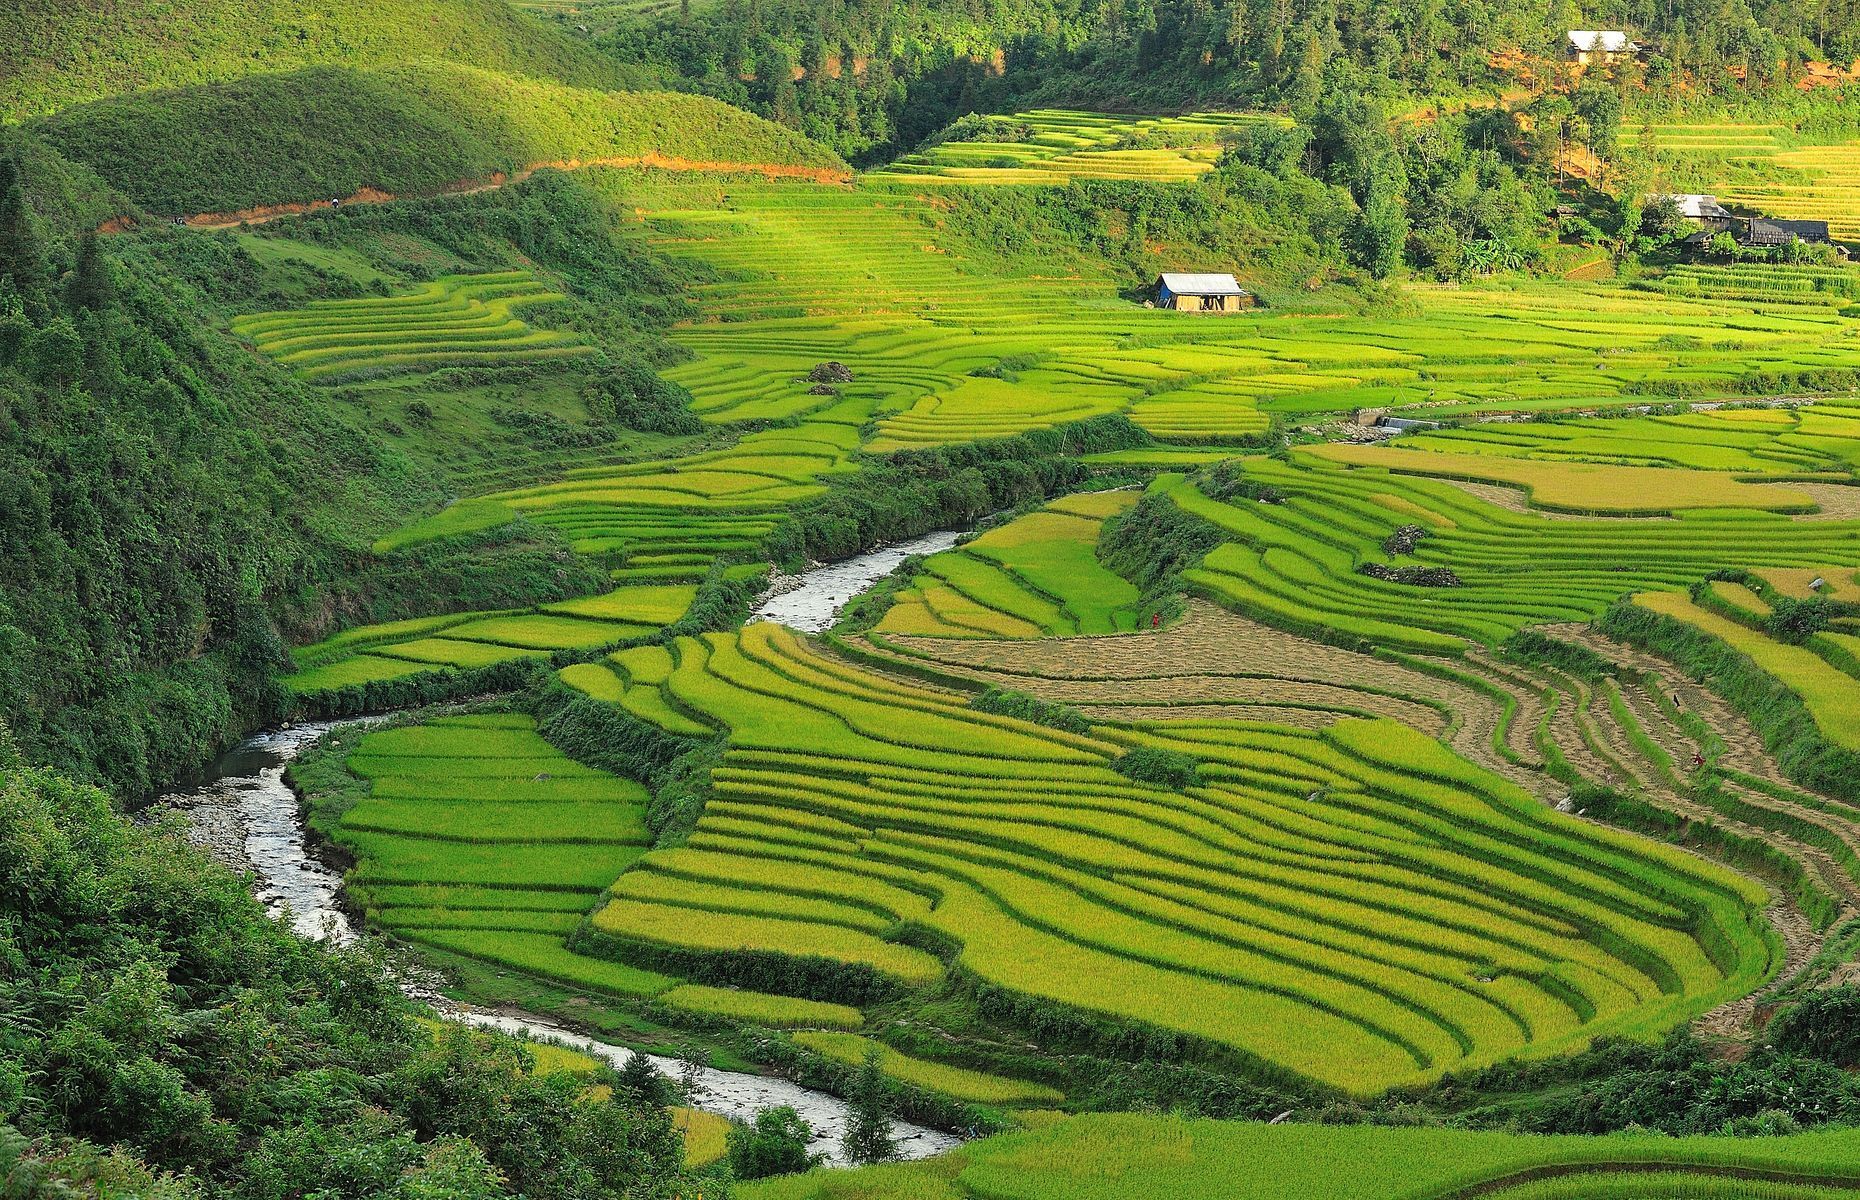 <p>Nestled in the mountains of northwestern Vietnam, <a href="https://vietnam.travel/places-to-go/northern-vietnam/sapa" class="atom_link atom_valid" rel="noreferrer noopener">Sapa</a> is an extraordinary destination sure to charm with its astonishingly beautiful landscapes. Particularly impressive in September and October, verdant rice paddies stretch as far as the eye can see. Hiking enthusiasts can also explore the peaks of the Hoang Lien Son mountain range, including the country’s highest, <a href="https://vietnam.travel/things-to-do/why-fansipan-must-do-sapa" class="atom_link atom_valid" rel="noreferrer noopener">Mount Fansipan</a>.</p>